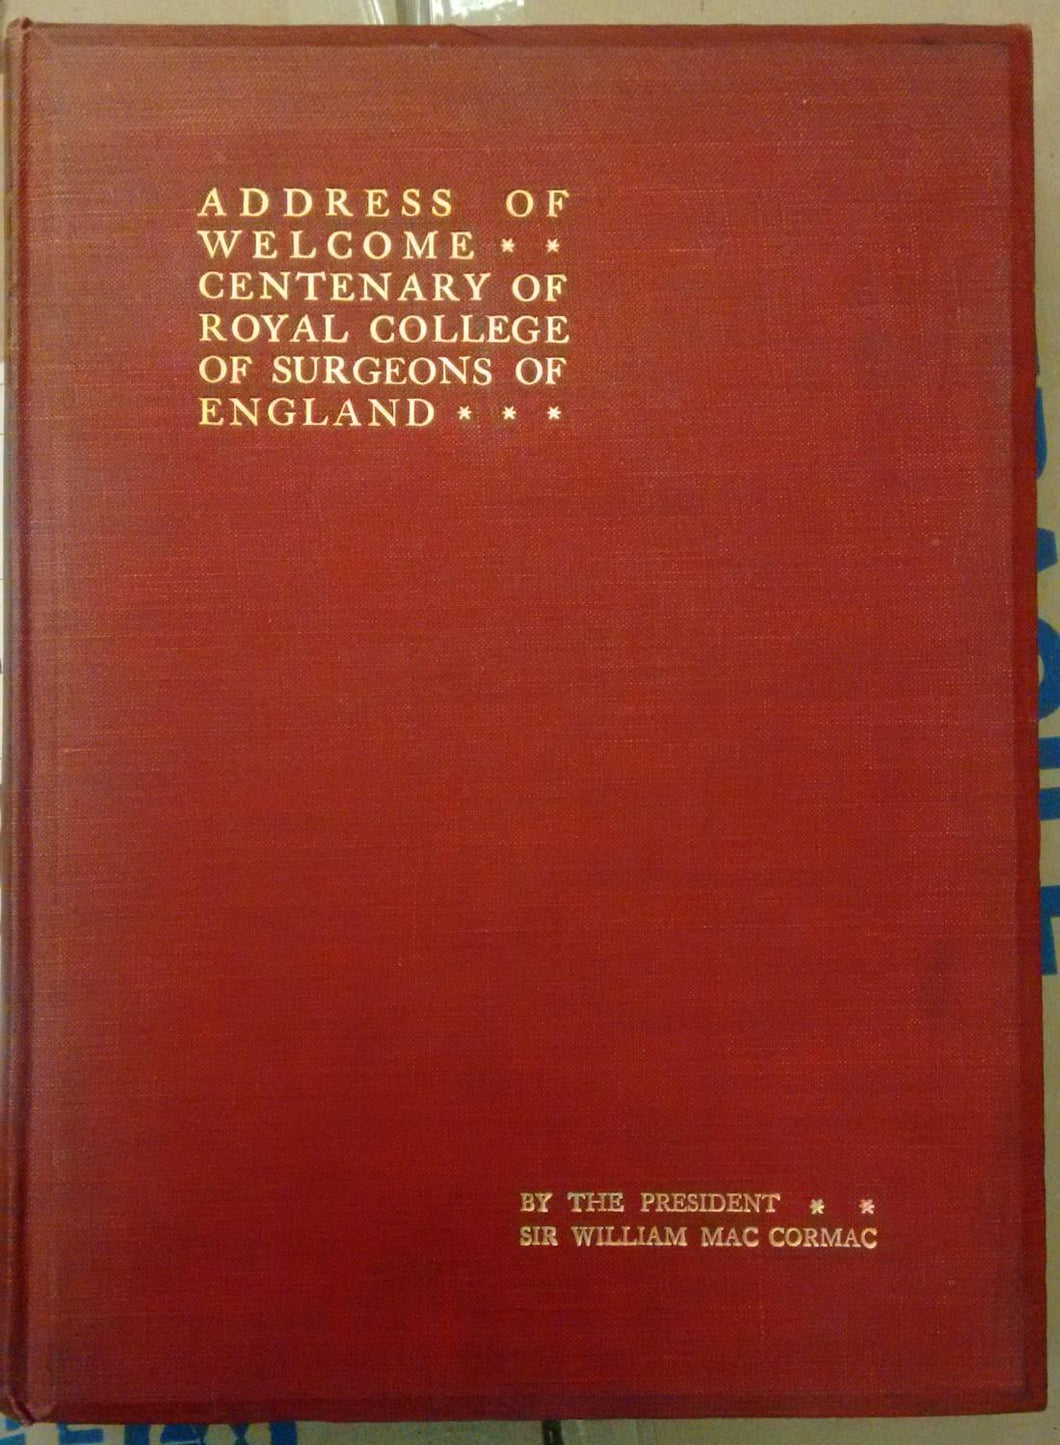 Address of Welcome: Centenary of the Royal College of Surgeons 1900